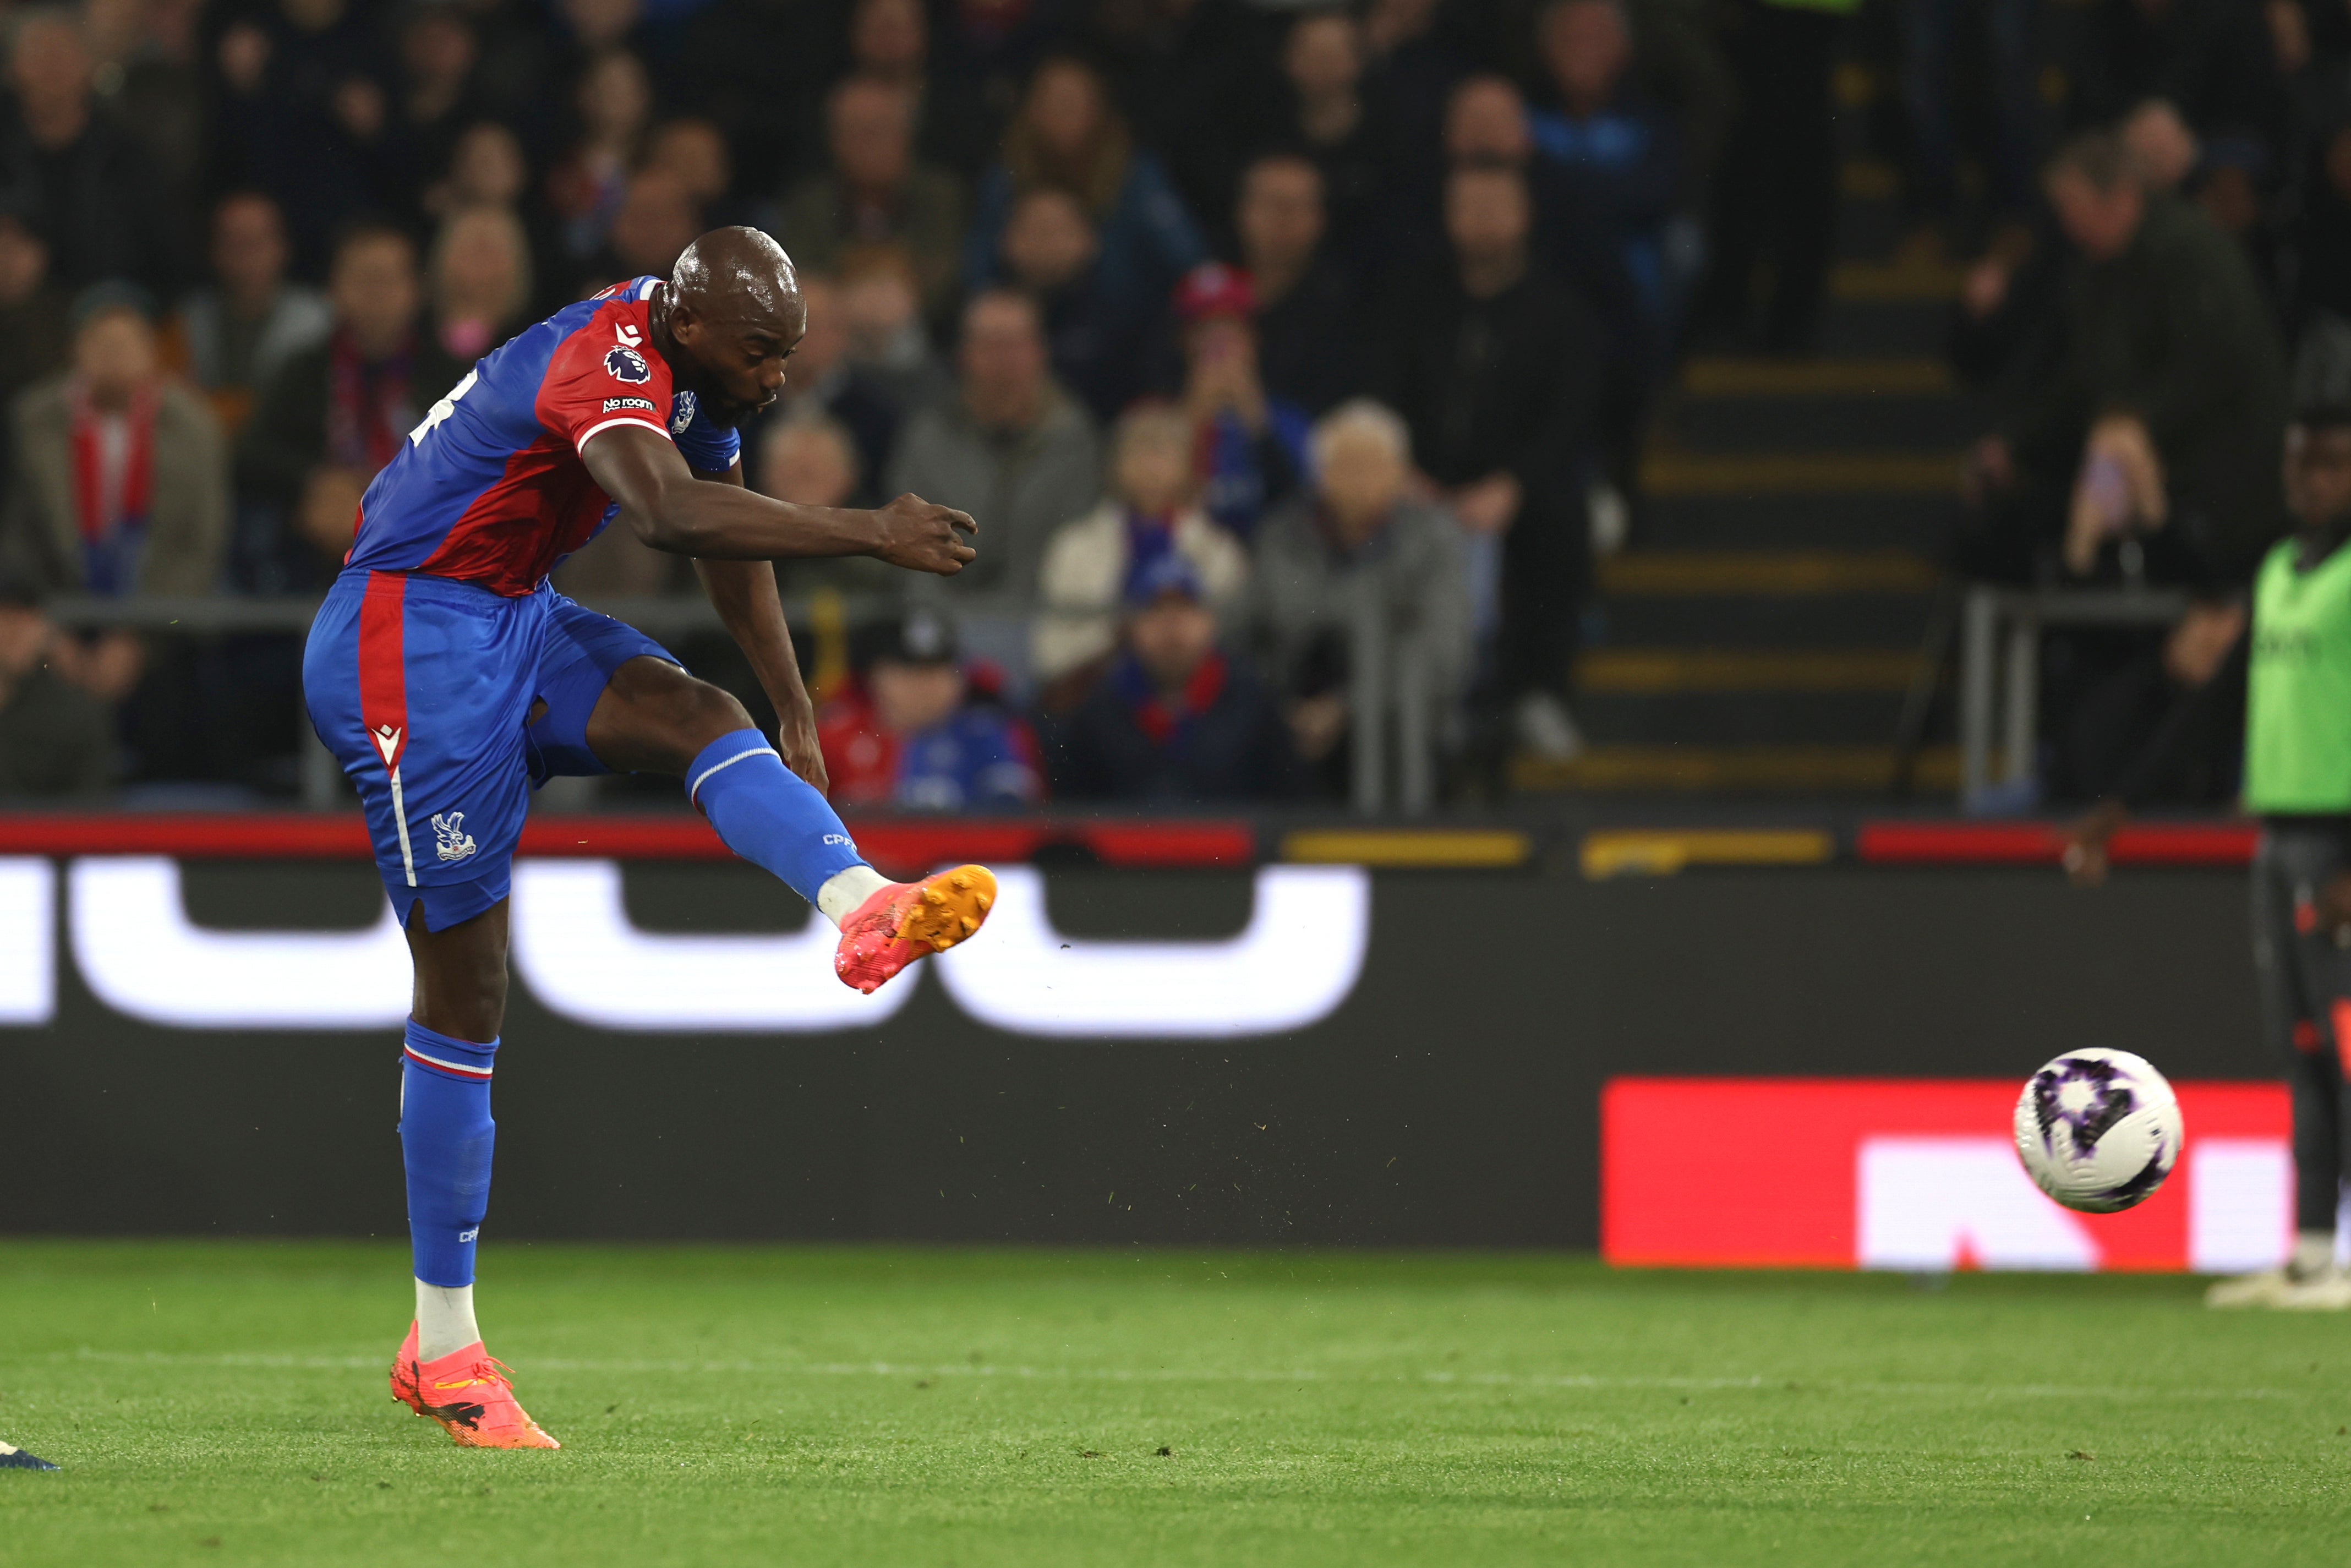 Jean-Philippe Mateta scored again at Selhurst Park to continue his wonderful form